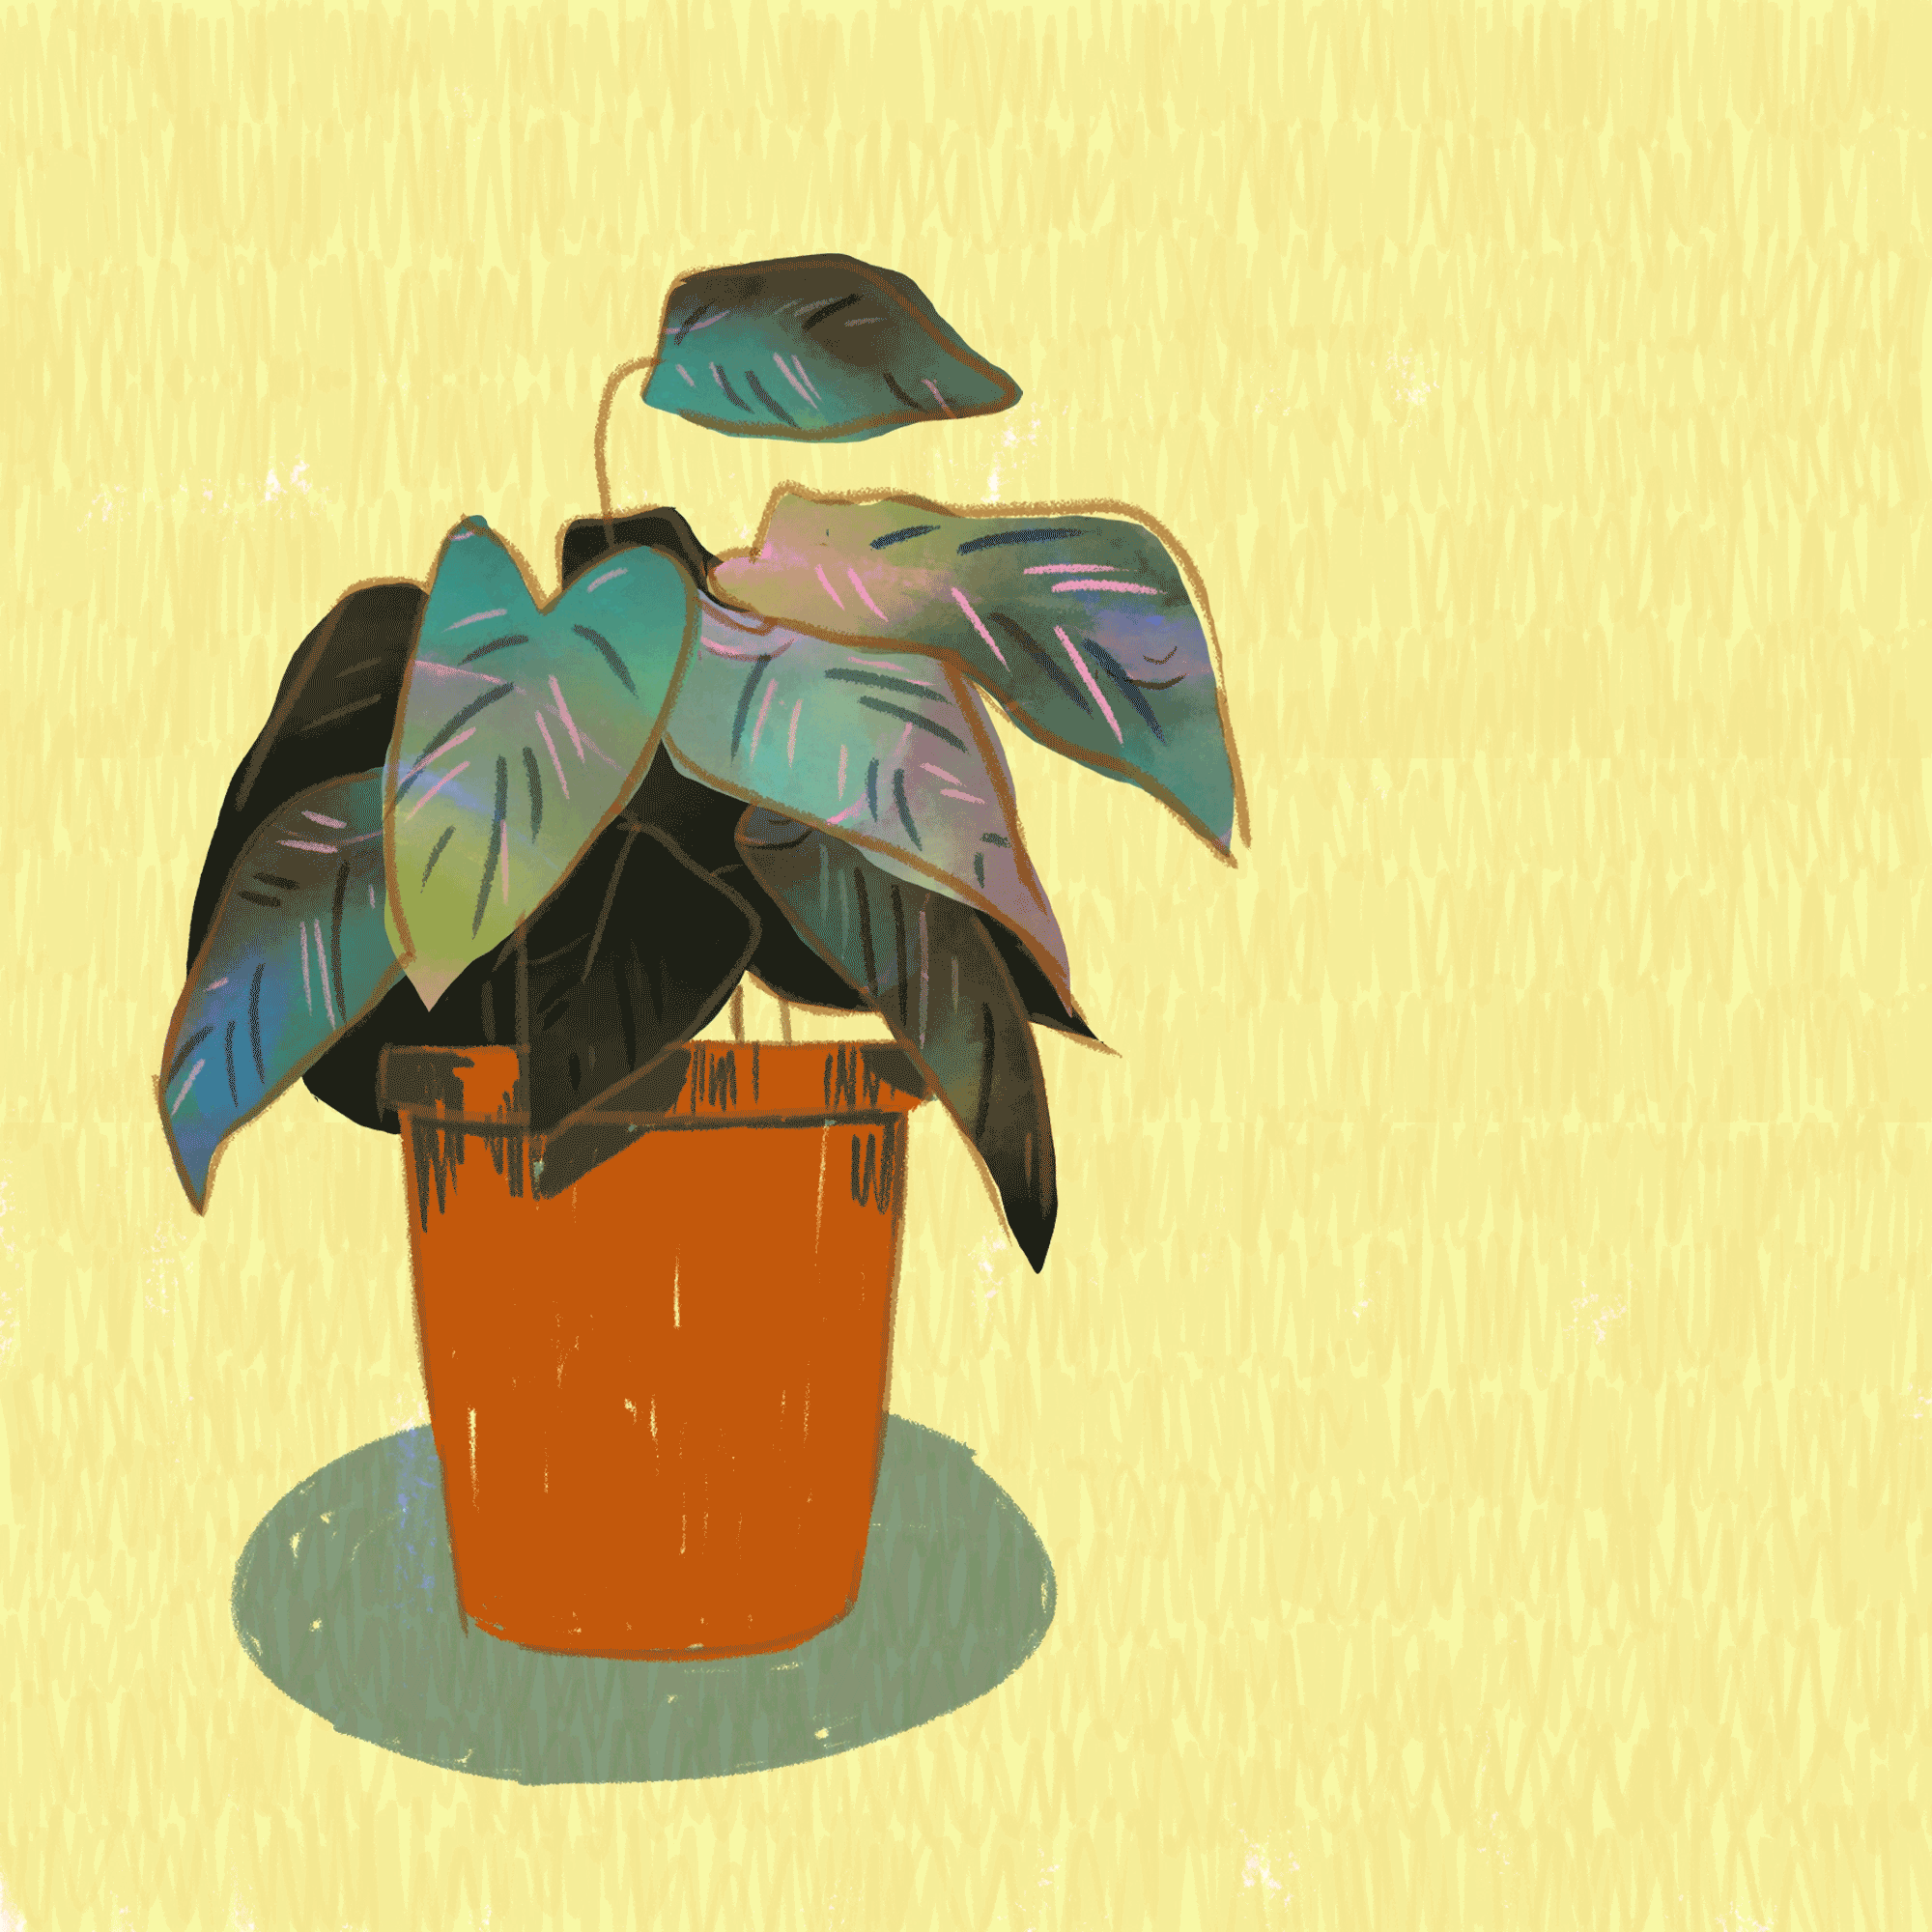 Moving illustration created for a self-initiated brief for an article about the "Benefits of House Plants".